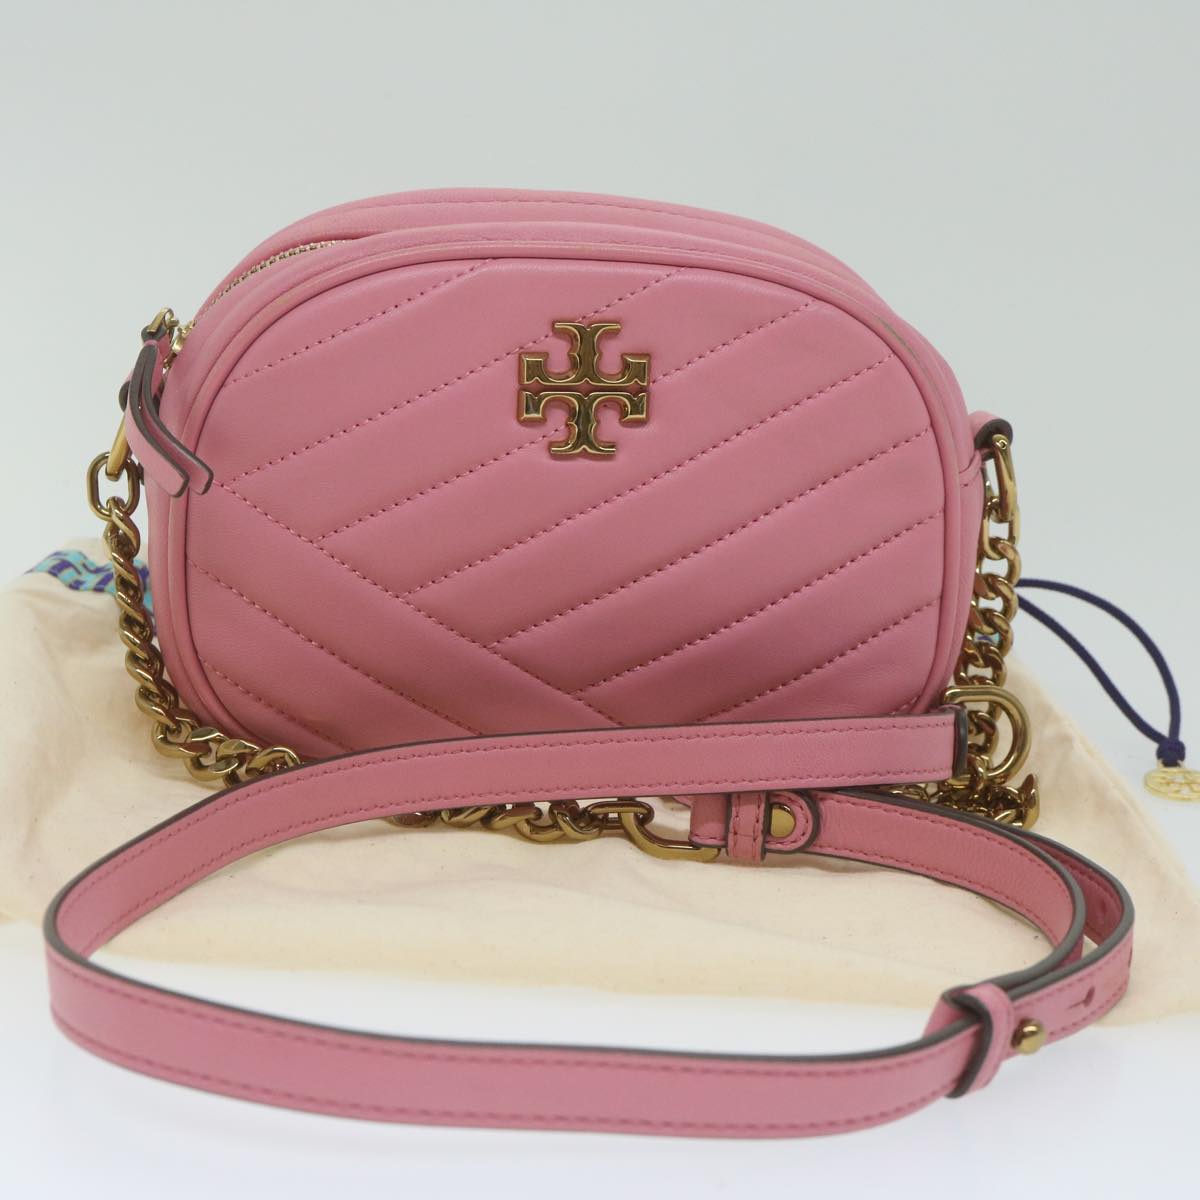 TORY BURCH Quilted Chain Shoulder Bag Leather Pink Auth am5420